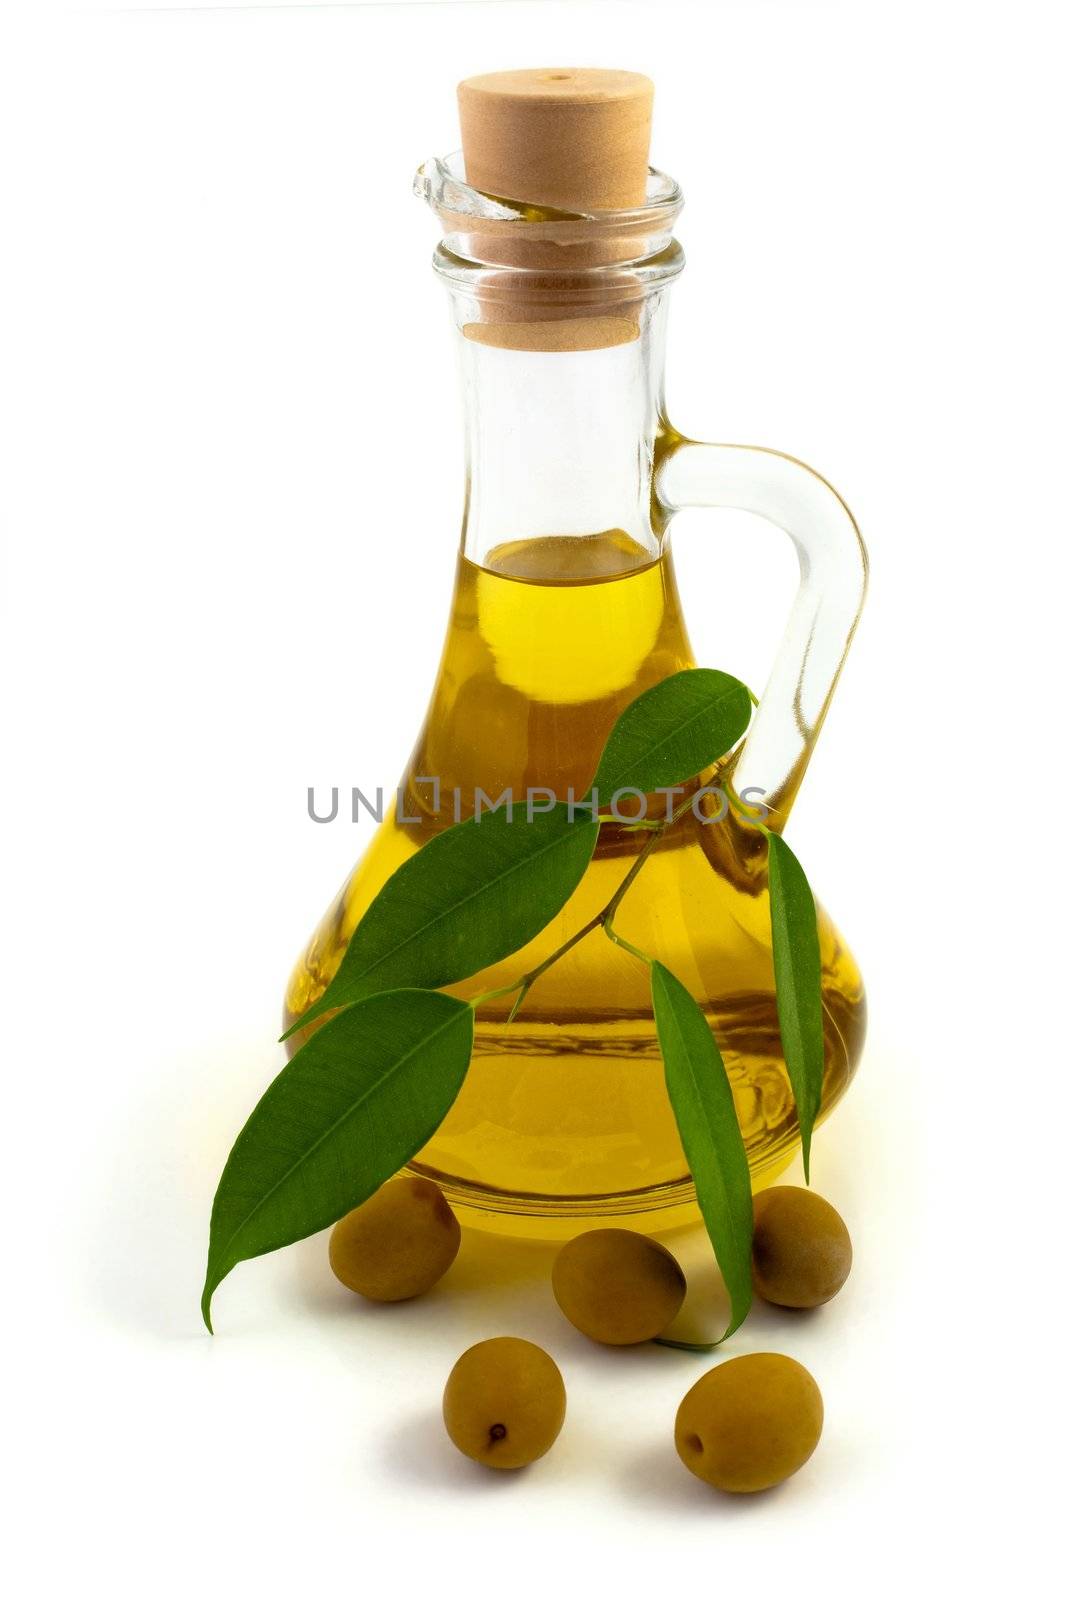 An image of a bottle of olive oil and olives